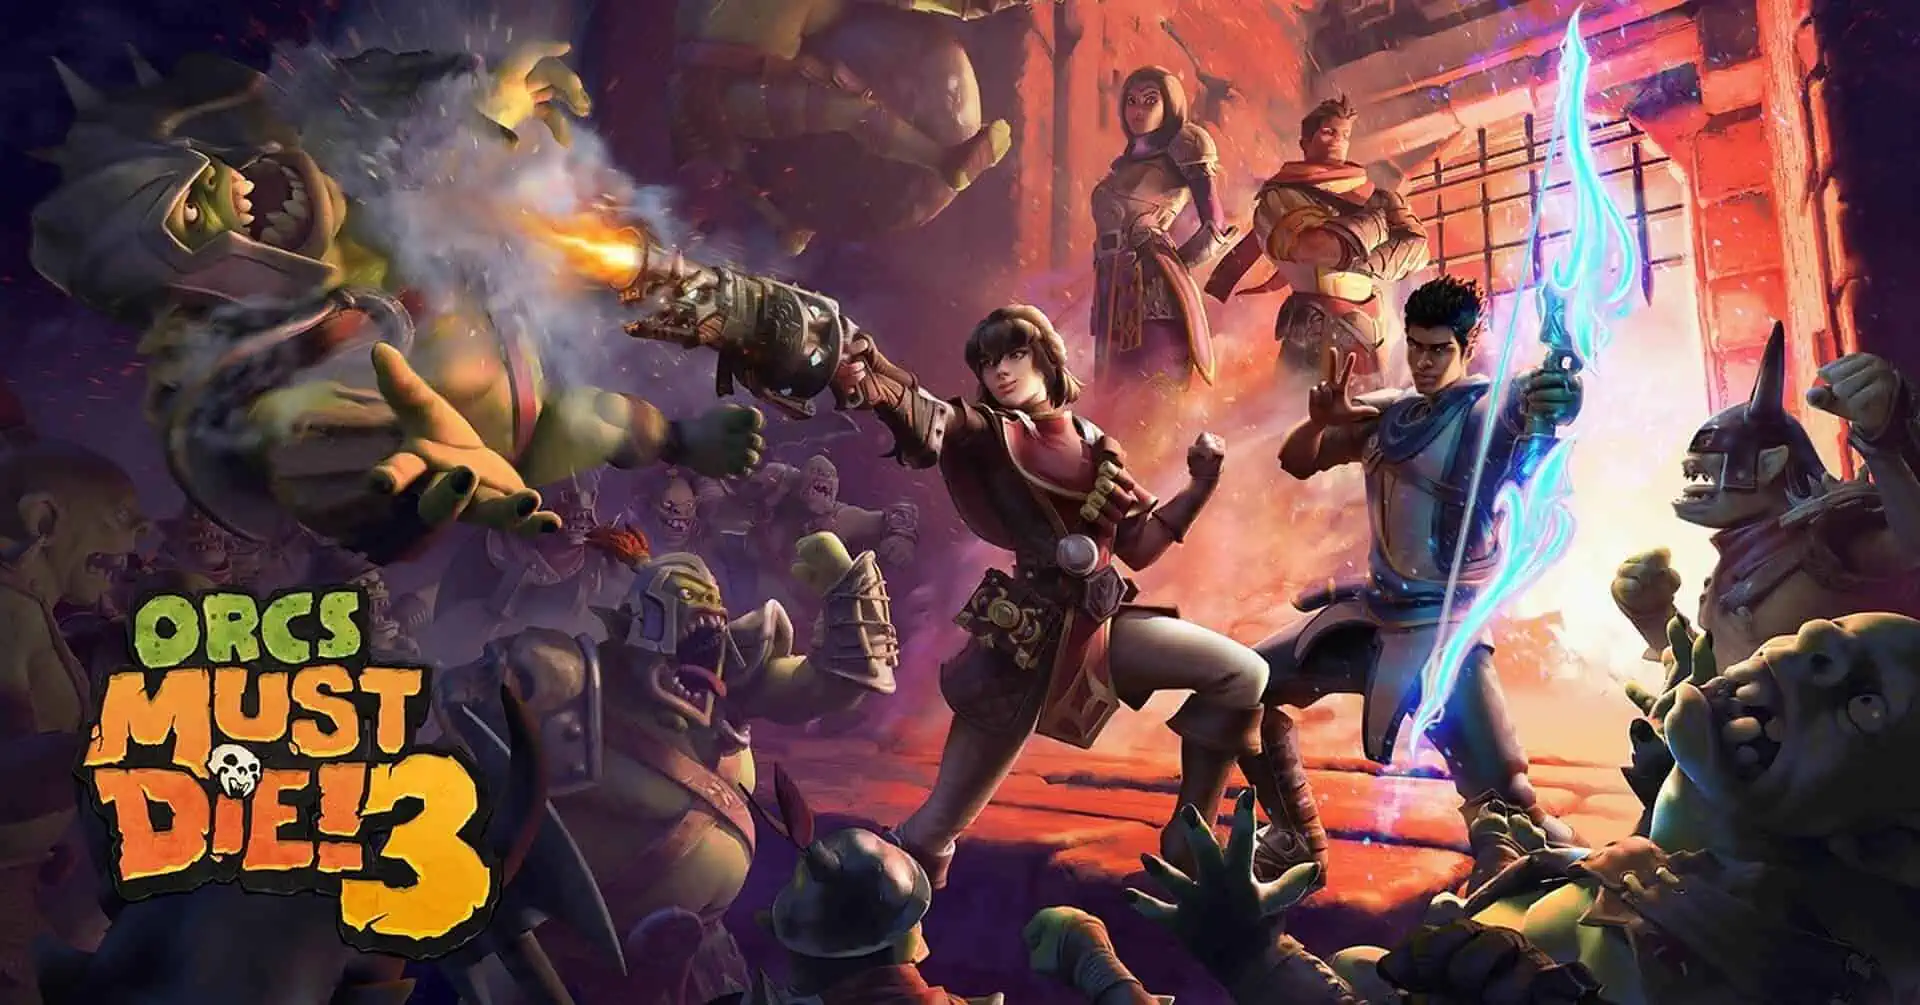 Orcs Must Die! 3 Review: A zany Stadia exclusive that’s business as usual